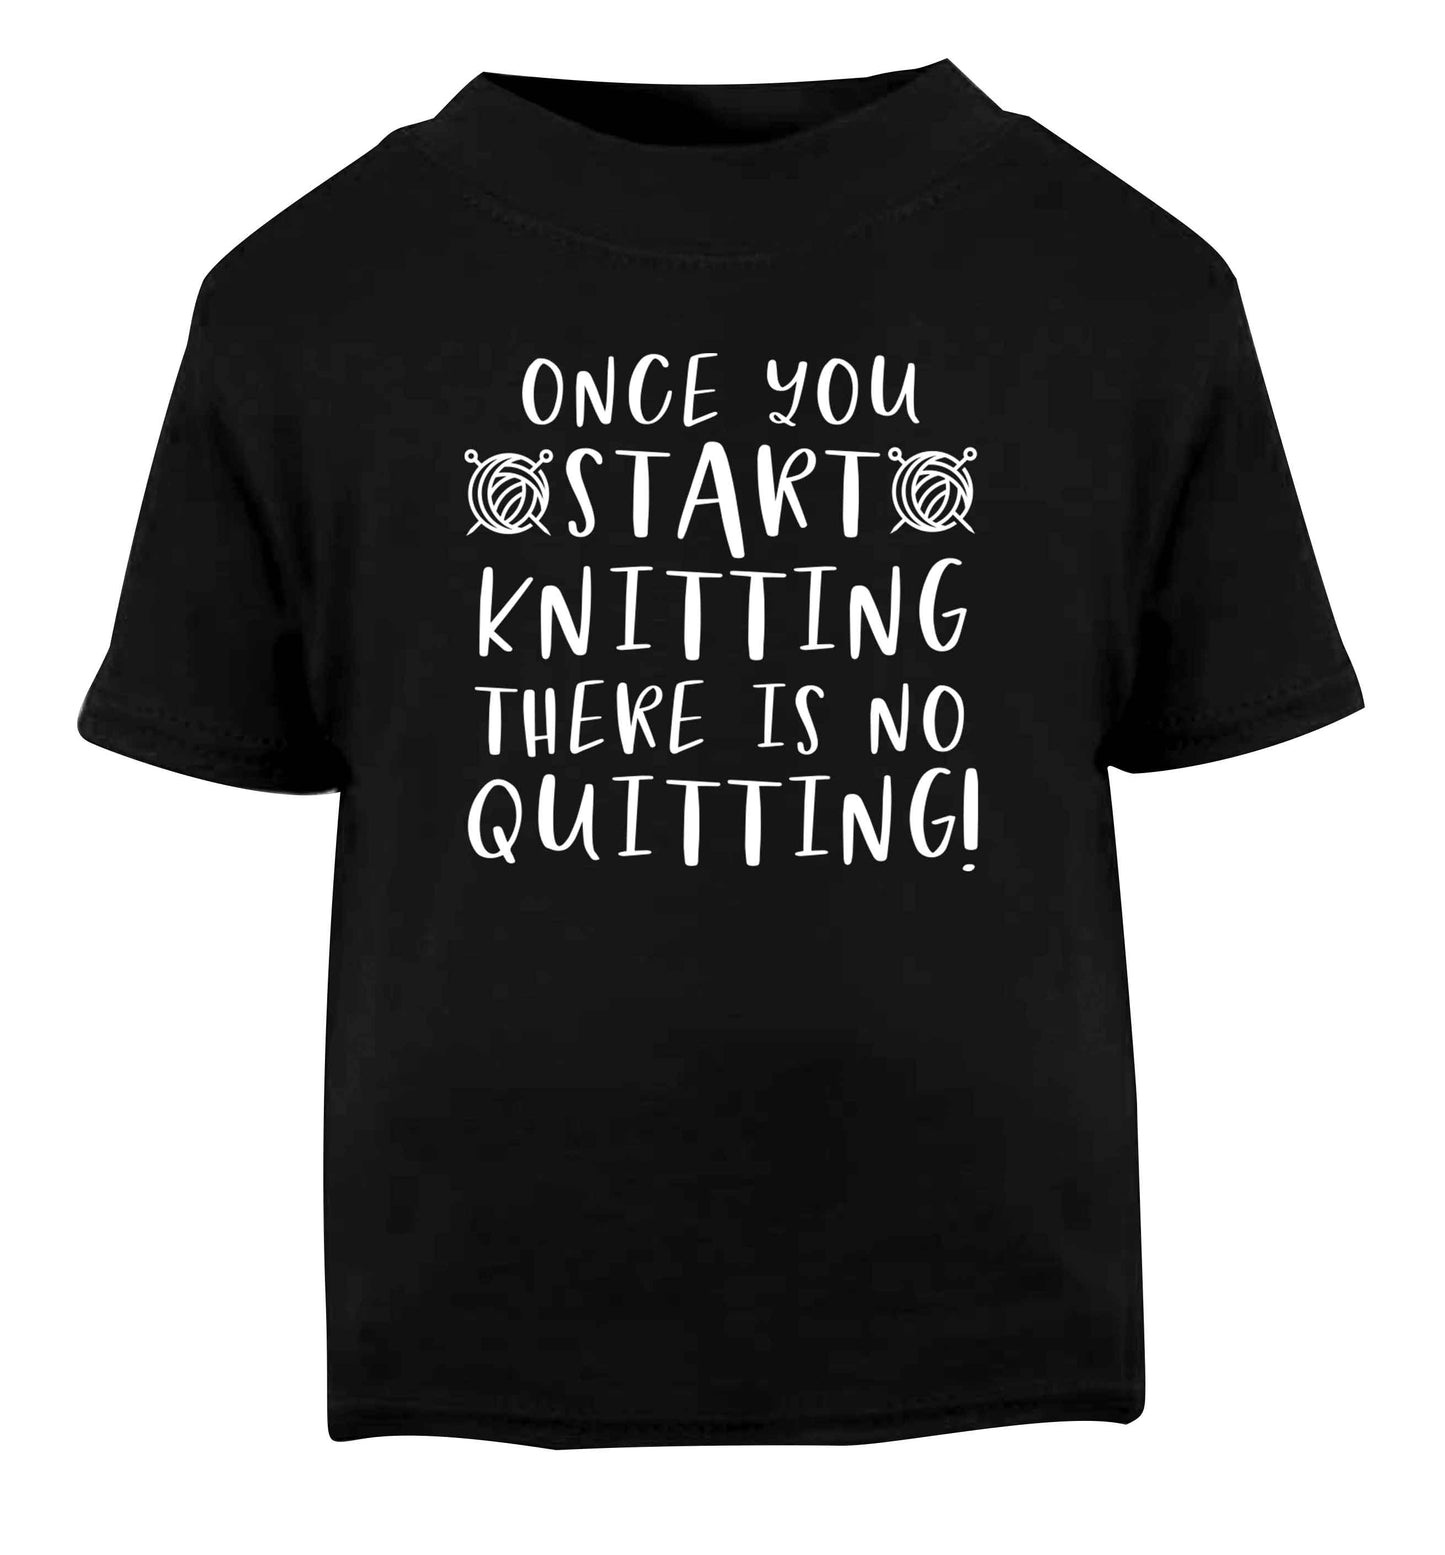 Once you start knitting there is no quitting! Black Baby Toddler Tshirt 2 years